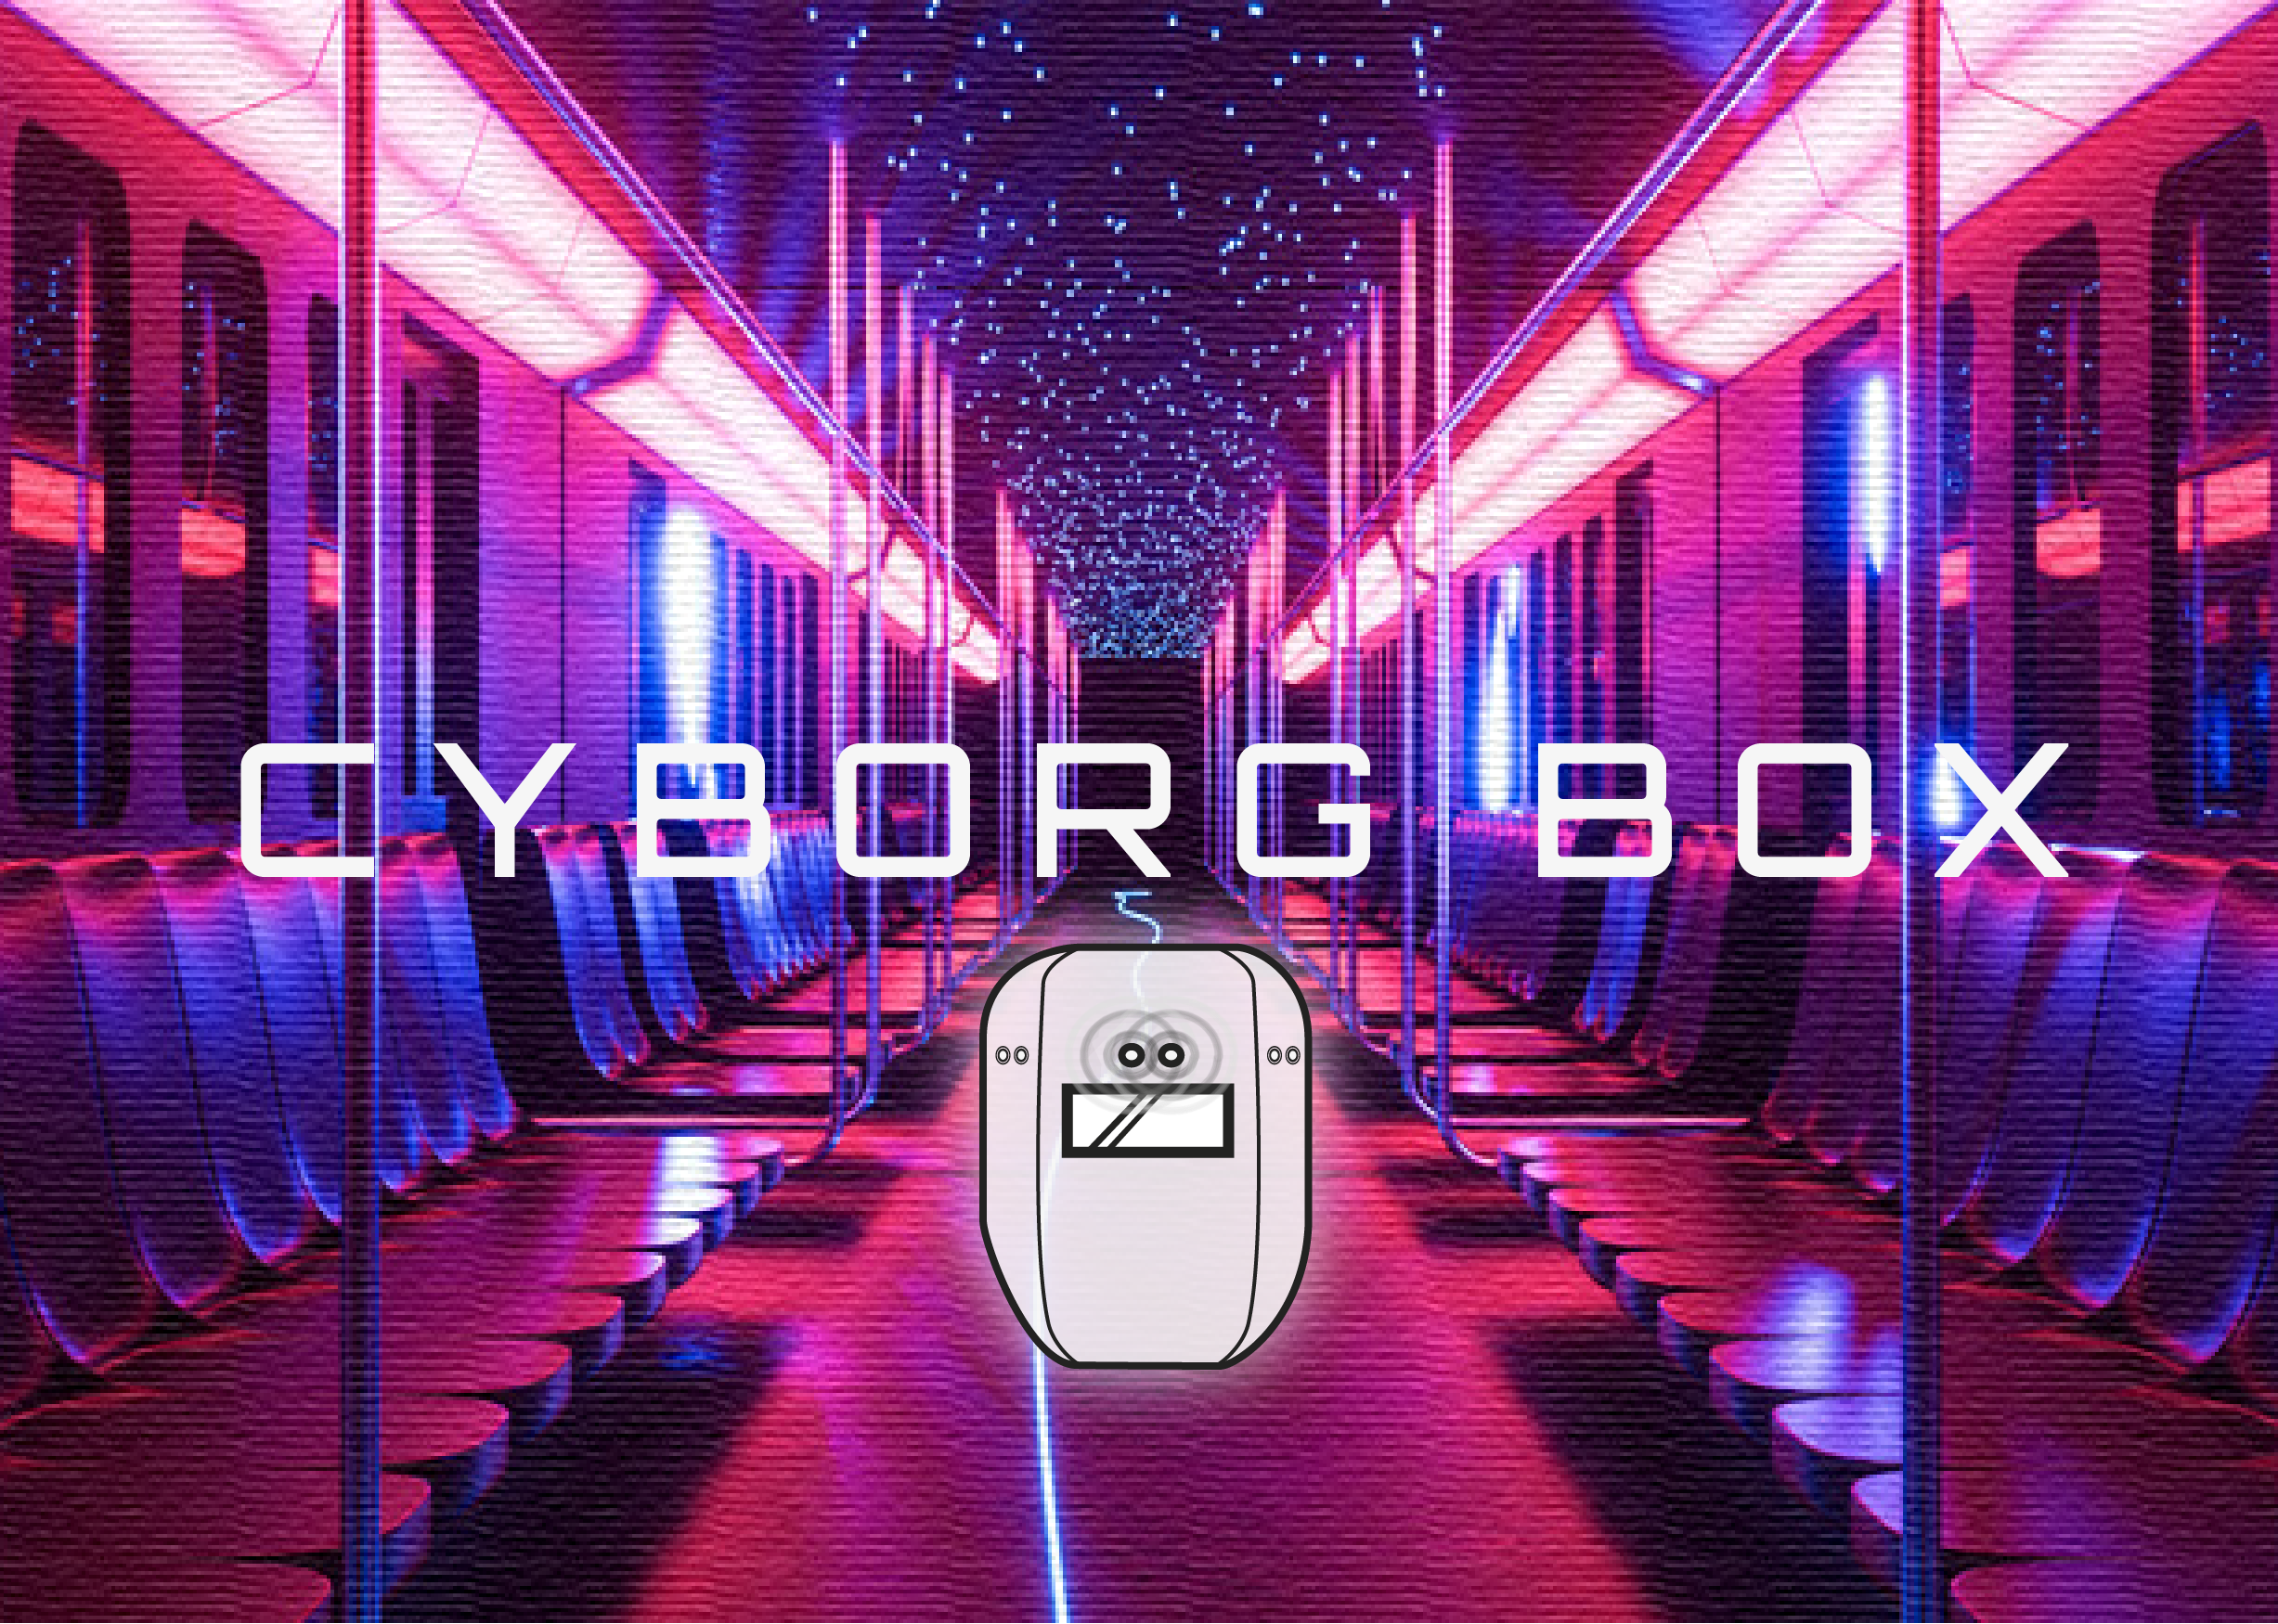 Thumbnail for the project Cyborg Box